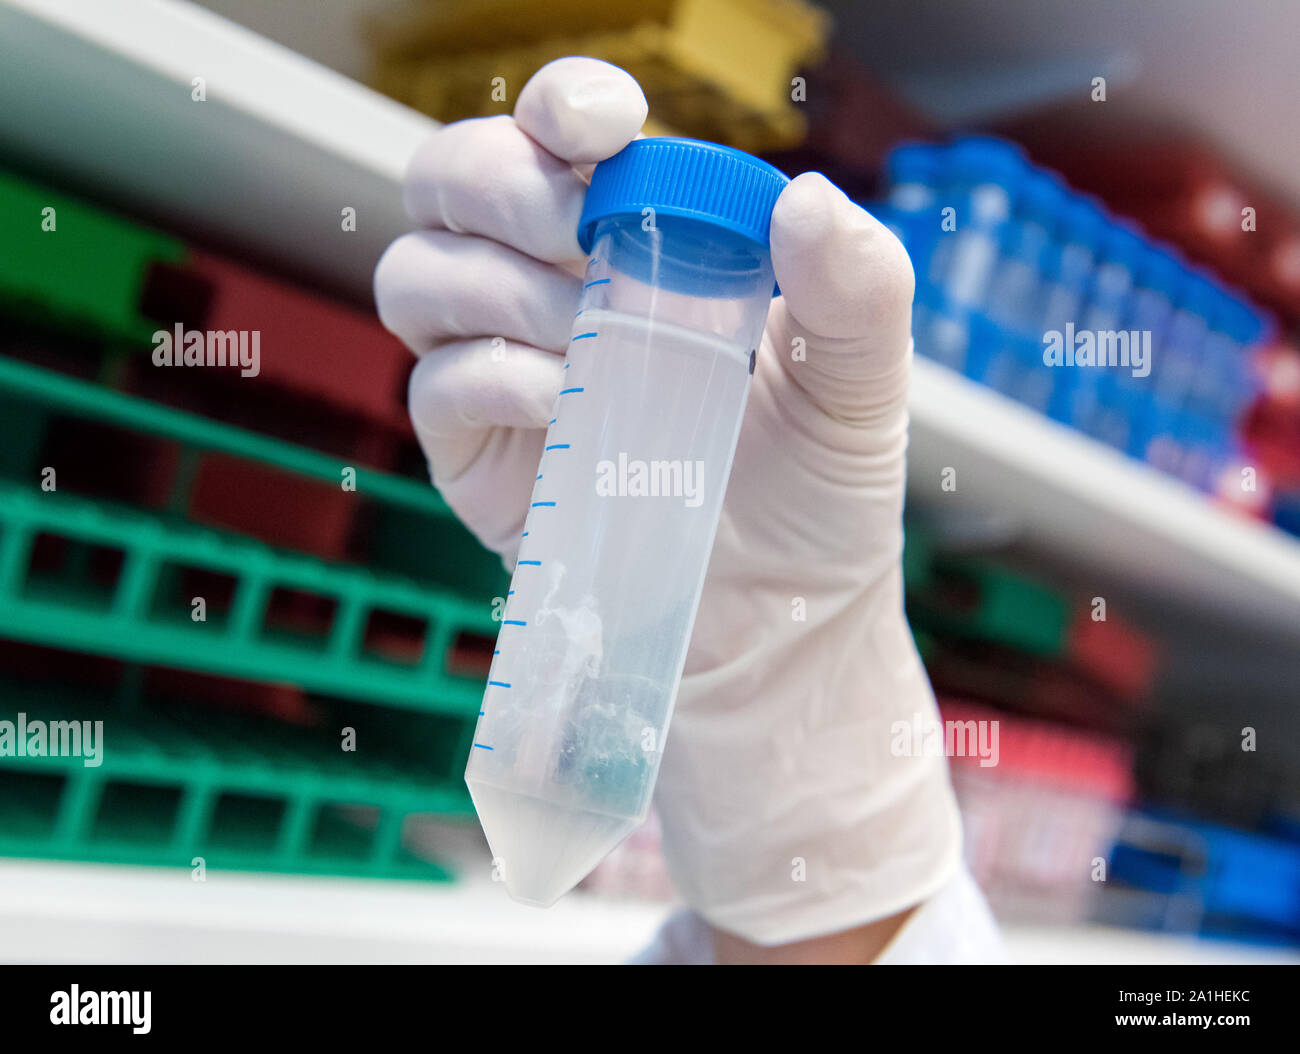 Hamburg, Germany. 25th Sep, 2019. DNA processed reacts with alcohol in a research laboratory at the University Hospital Hamburg Eppendorf (UKE). Scientists at the UKE want to find out more about the causes of cardiovascular diseases through a detailed analysis of the genetic material. Credit: Daniel Bockwoldt/dpa/Alamy Live News Stock Photo